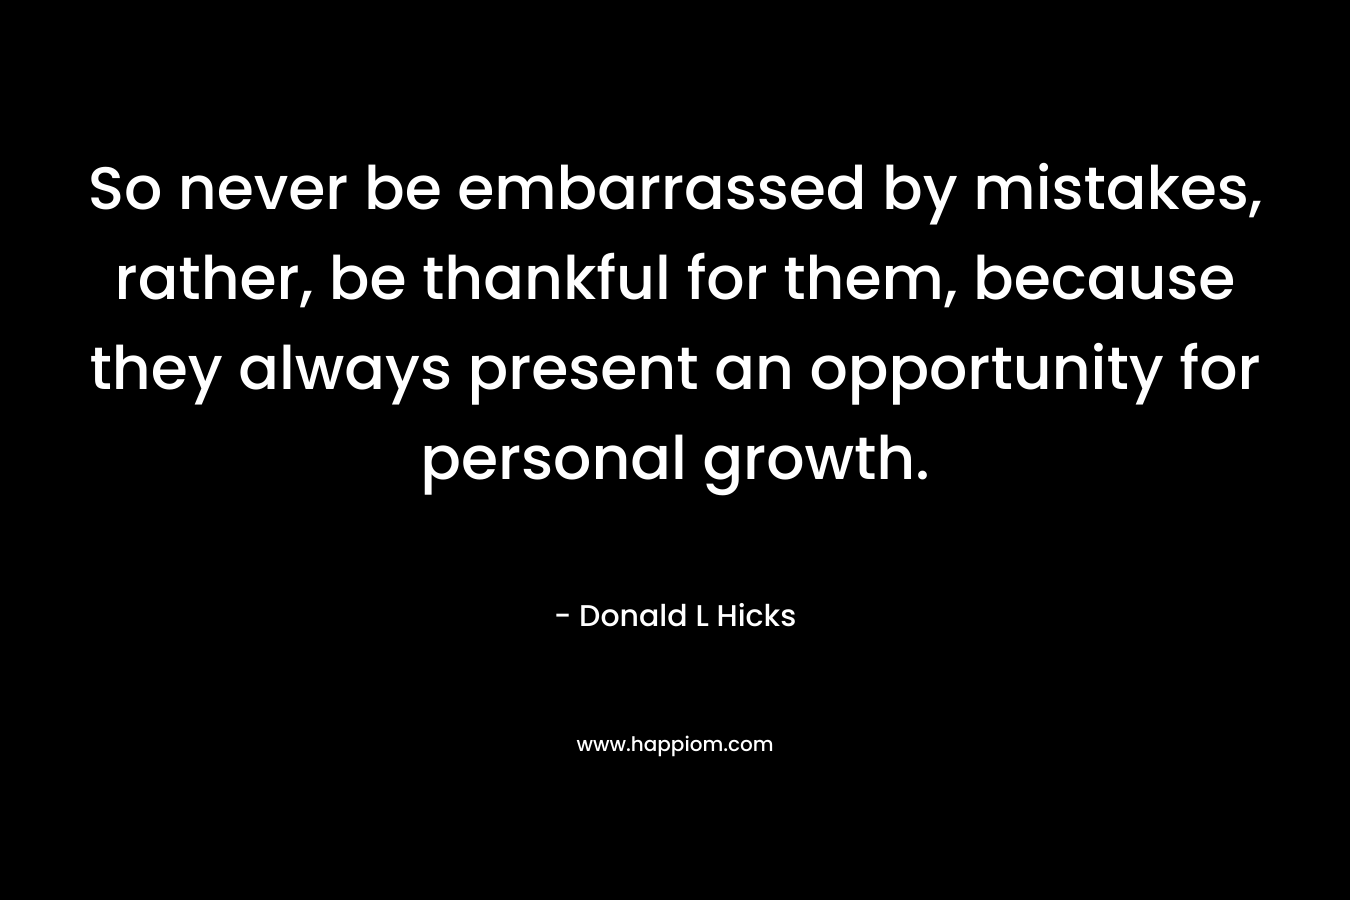 So never be embarrassed by mistakes, rather, be thankful for them, because they always present an opportunity for personal growth.